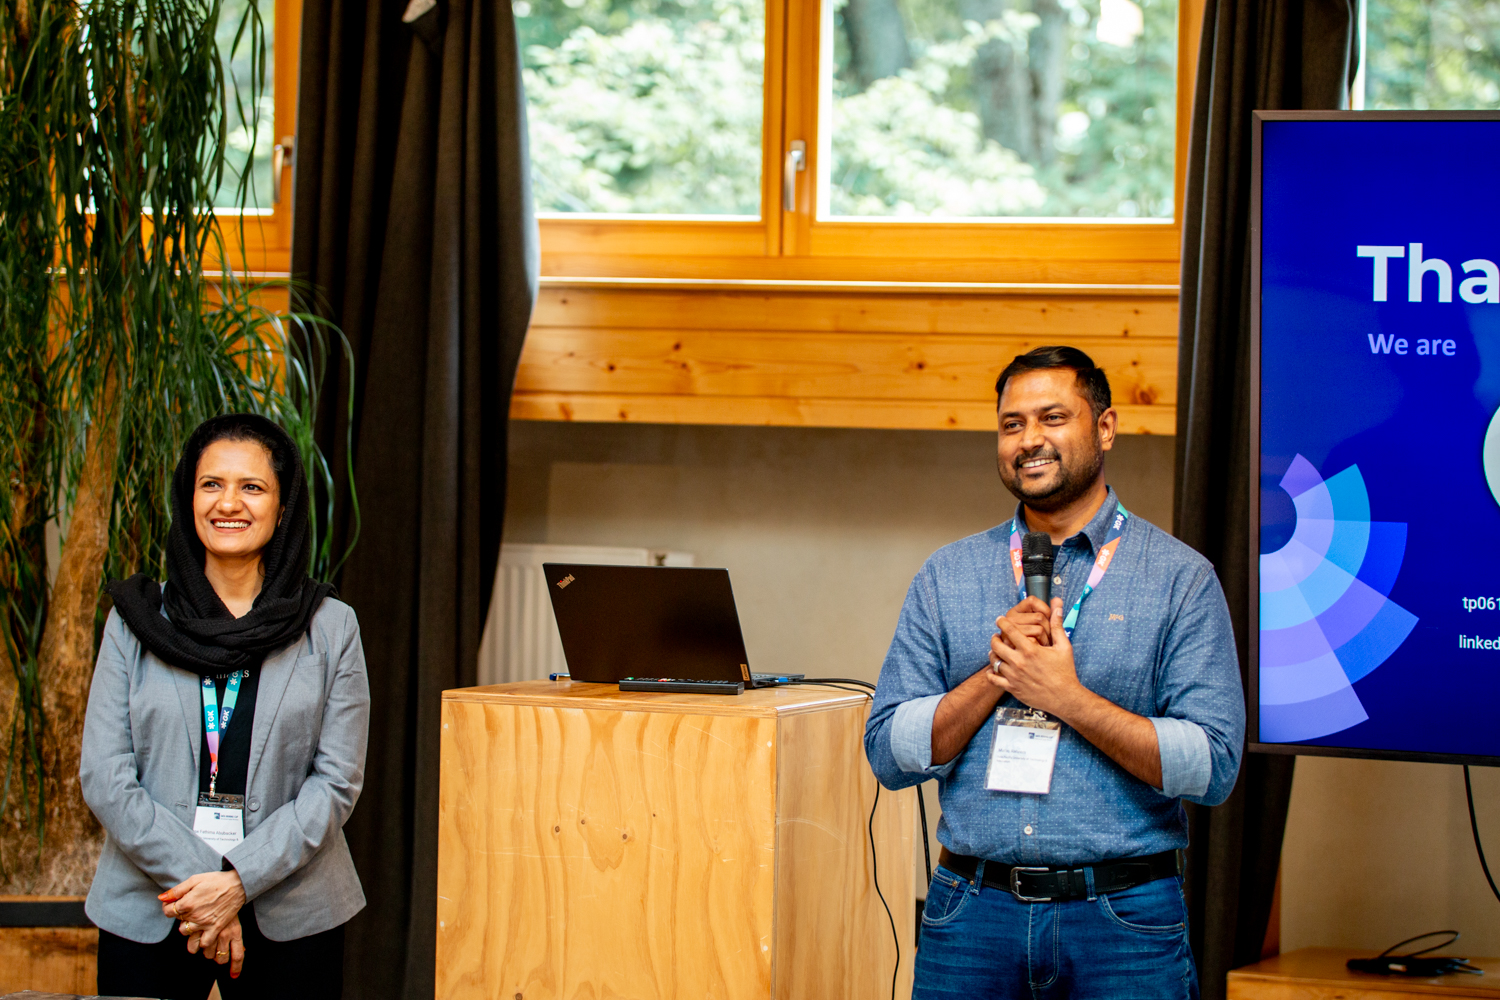 (L to R) Asso Prof Dr. Nirase Fathima Abubacker and Mafas Raheem, senior lecturers at APU presenting to judges and fellow winners in Berlin on the analytics model that won them a Top 3 spot in the Data Mining Cup 2023.